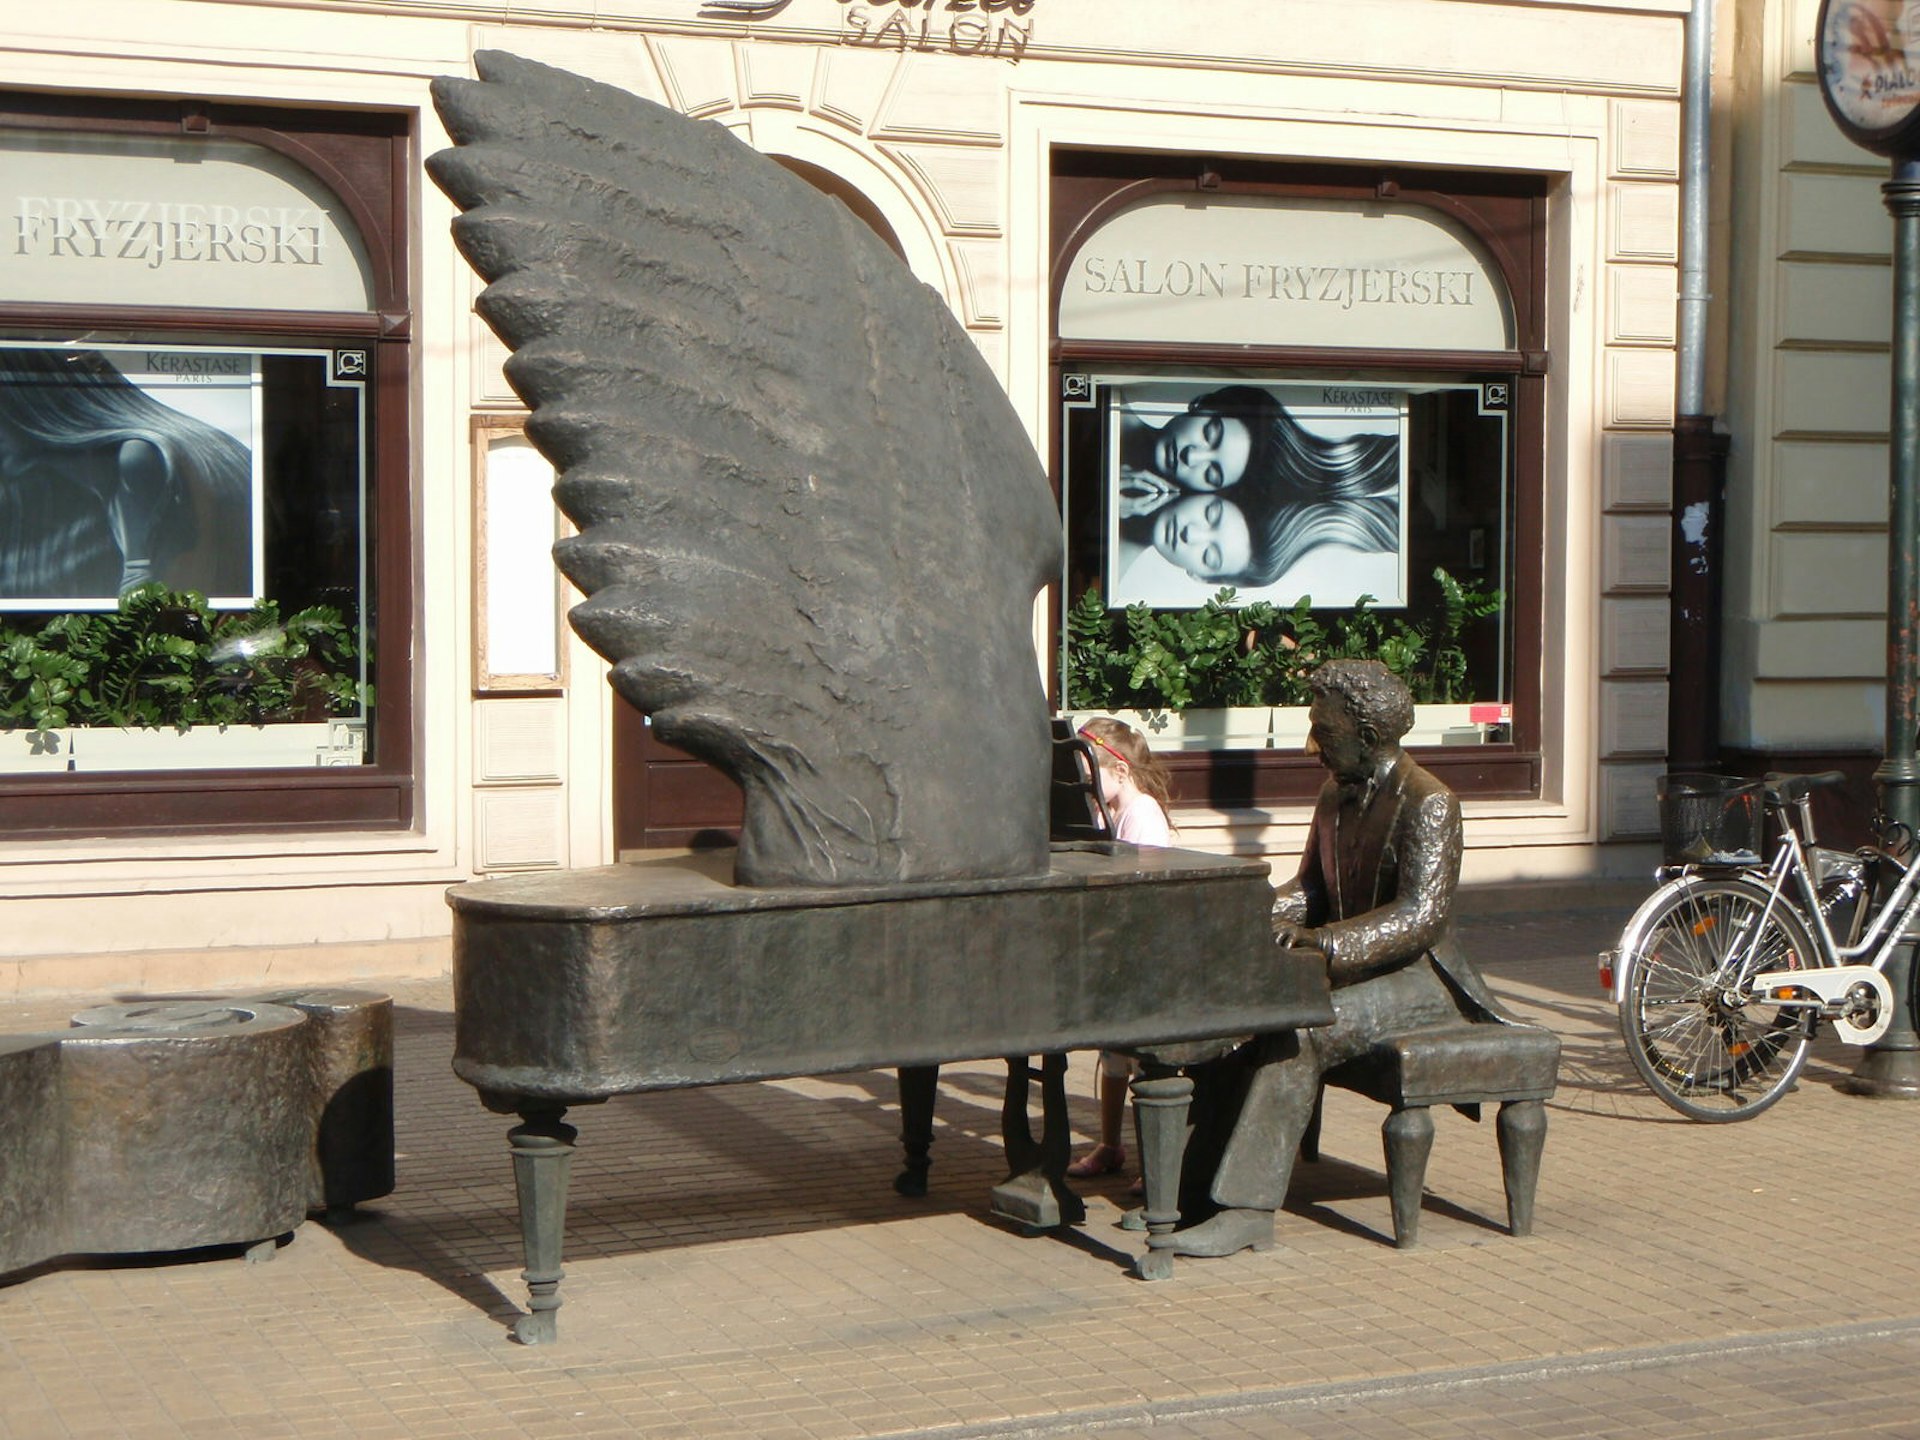 Grand statue of a piano with wings, commemorating one of Lodz's most famous sons, pianist Arthur Rubenstein © Tim Richards / Lonely Planet